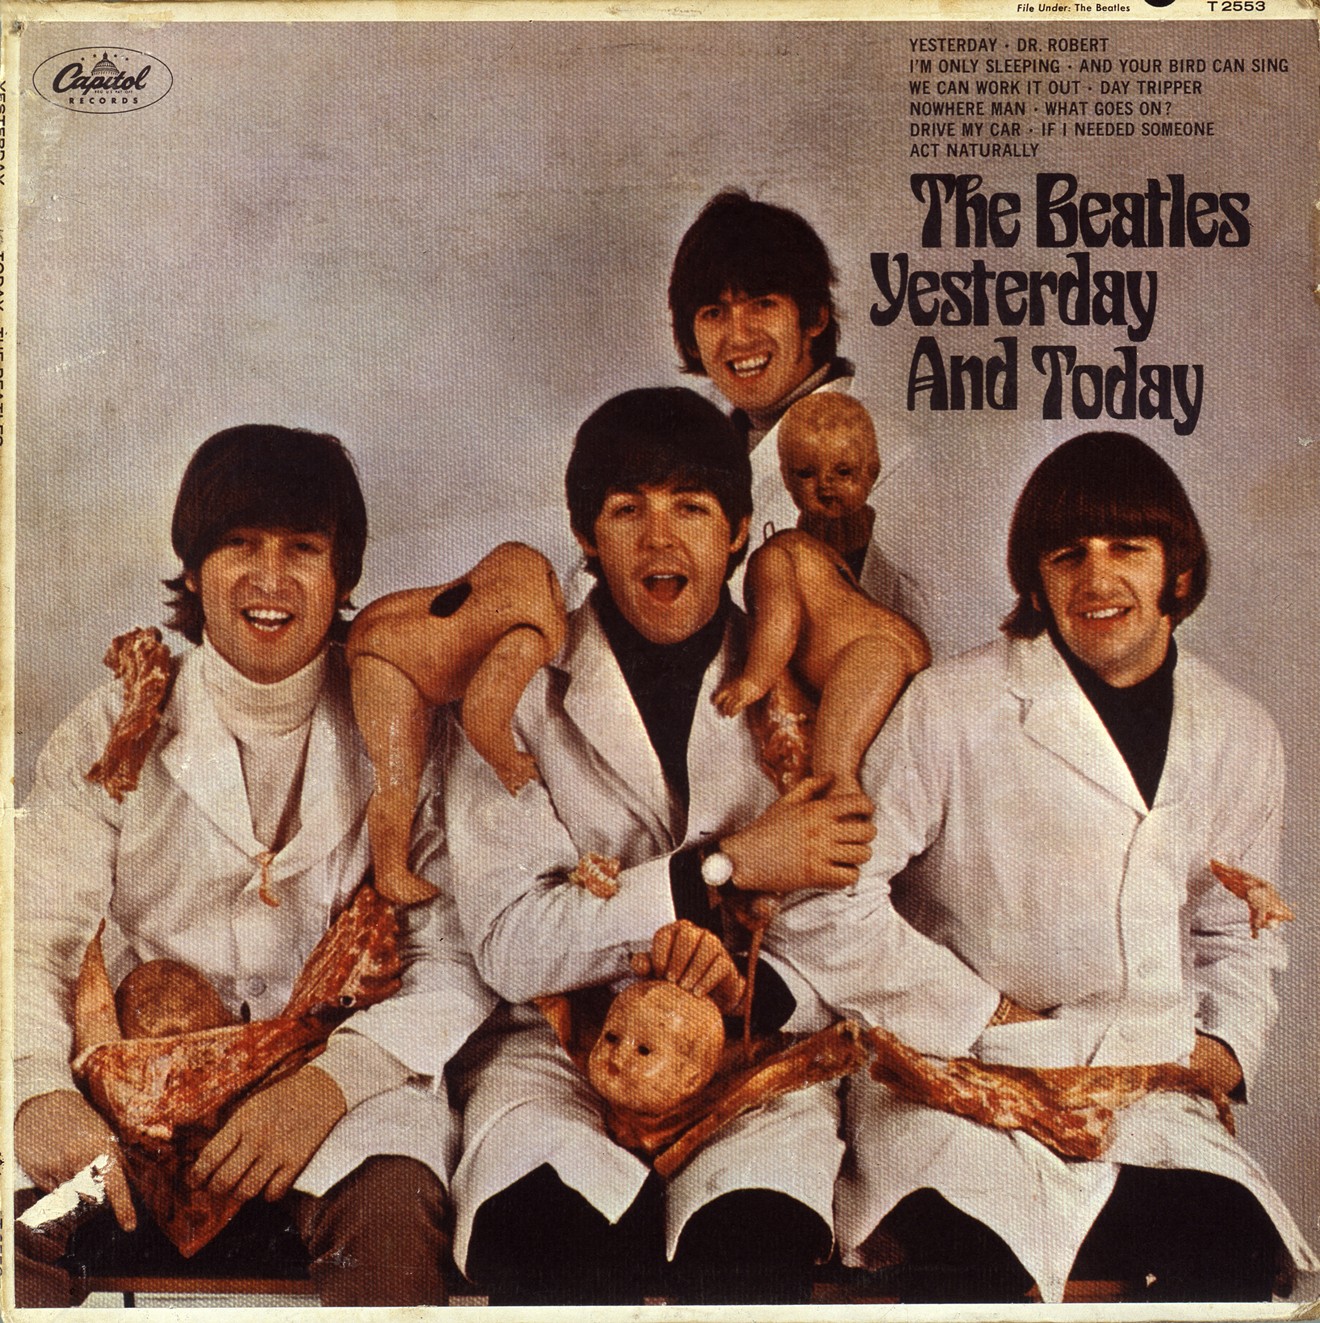 The Beatles’ “butcher cover” album is one of the rarest records of all-time.